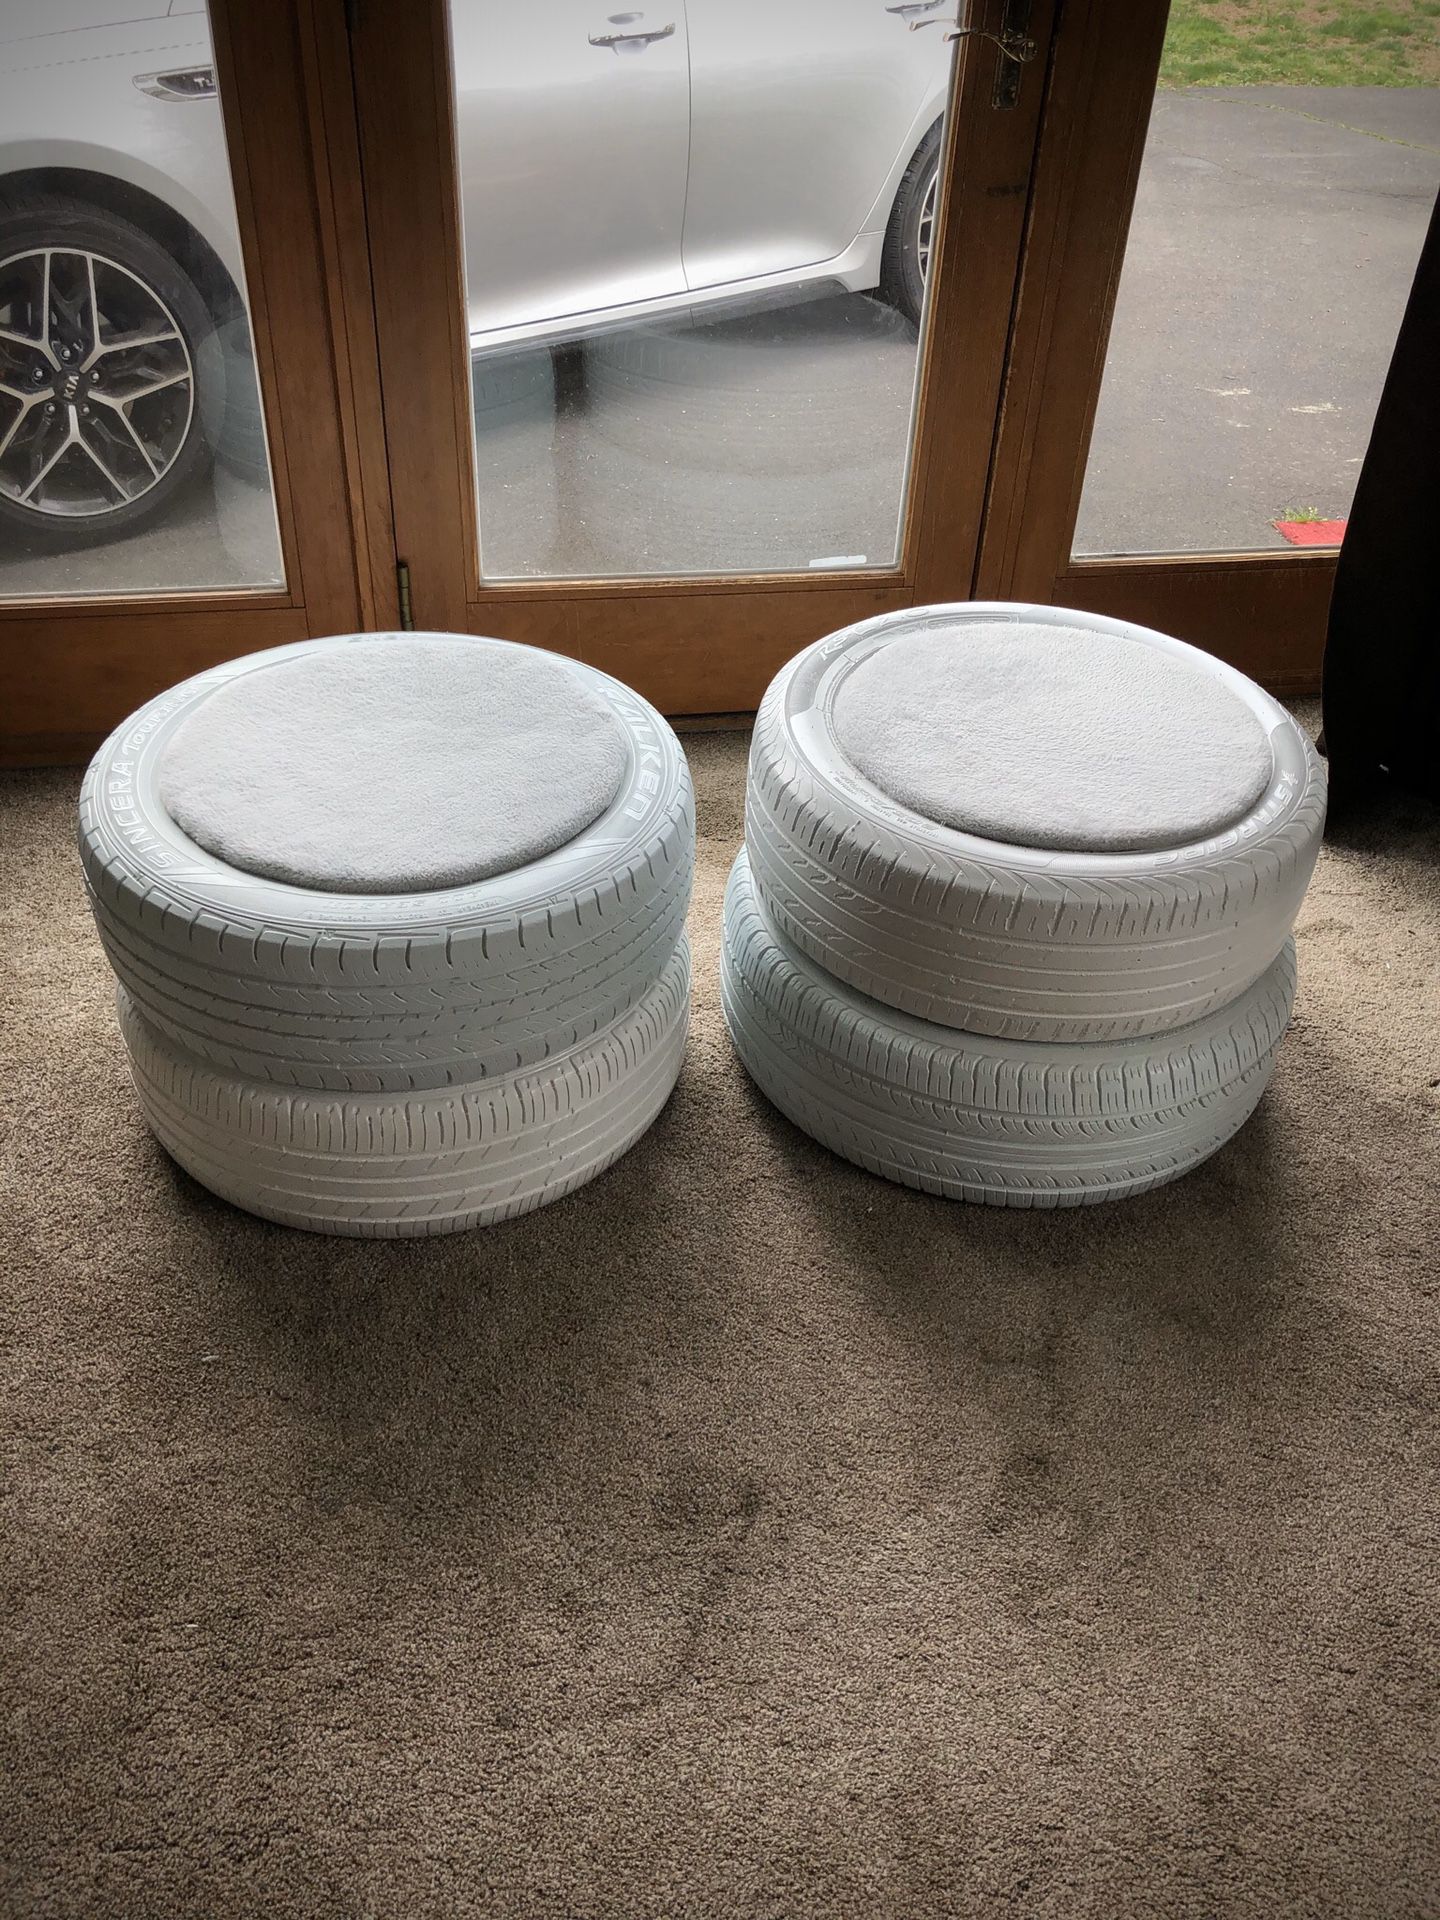 Storage Seat Ottomans. Great to use as outdoor furniture, storage, a man cave etc. Also, Super easy to to clean. The price is $120 for both or $65 ea